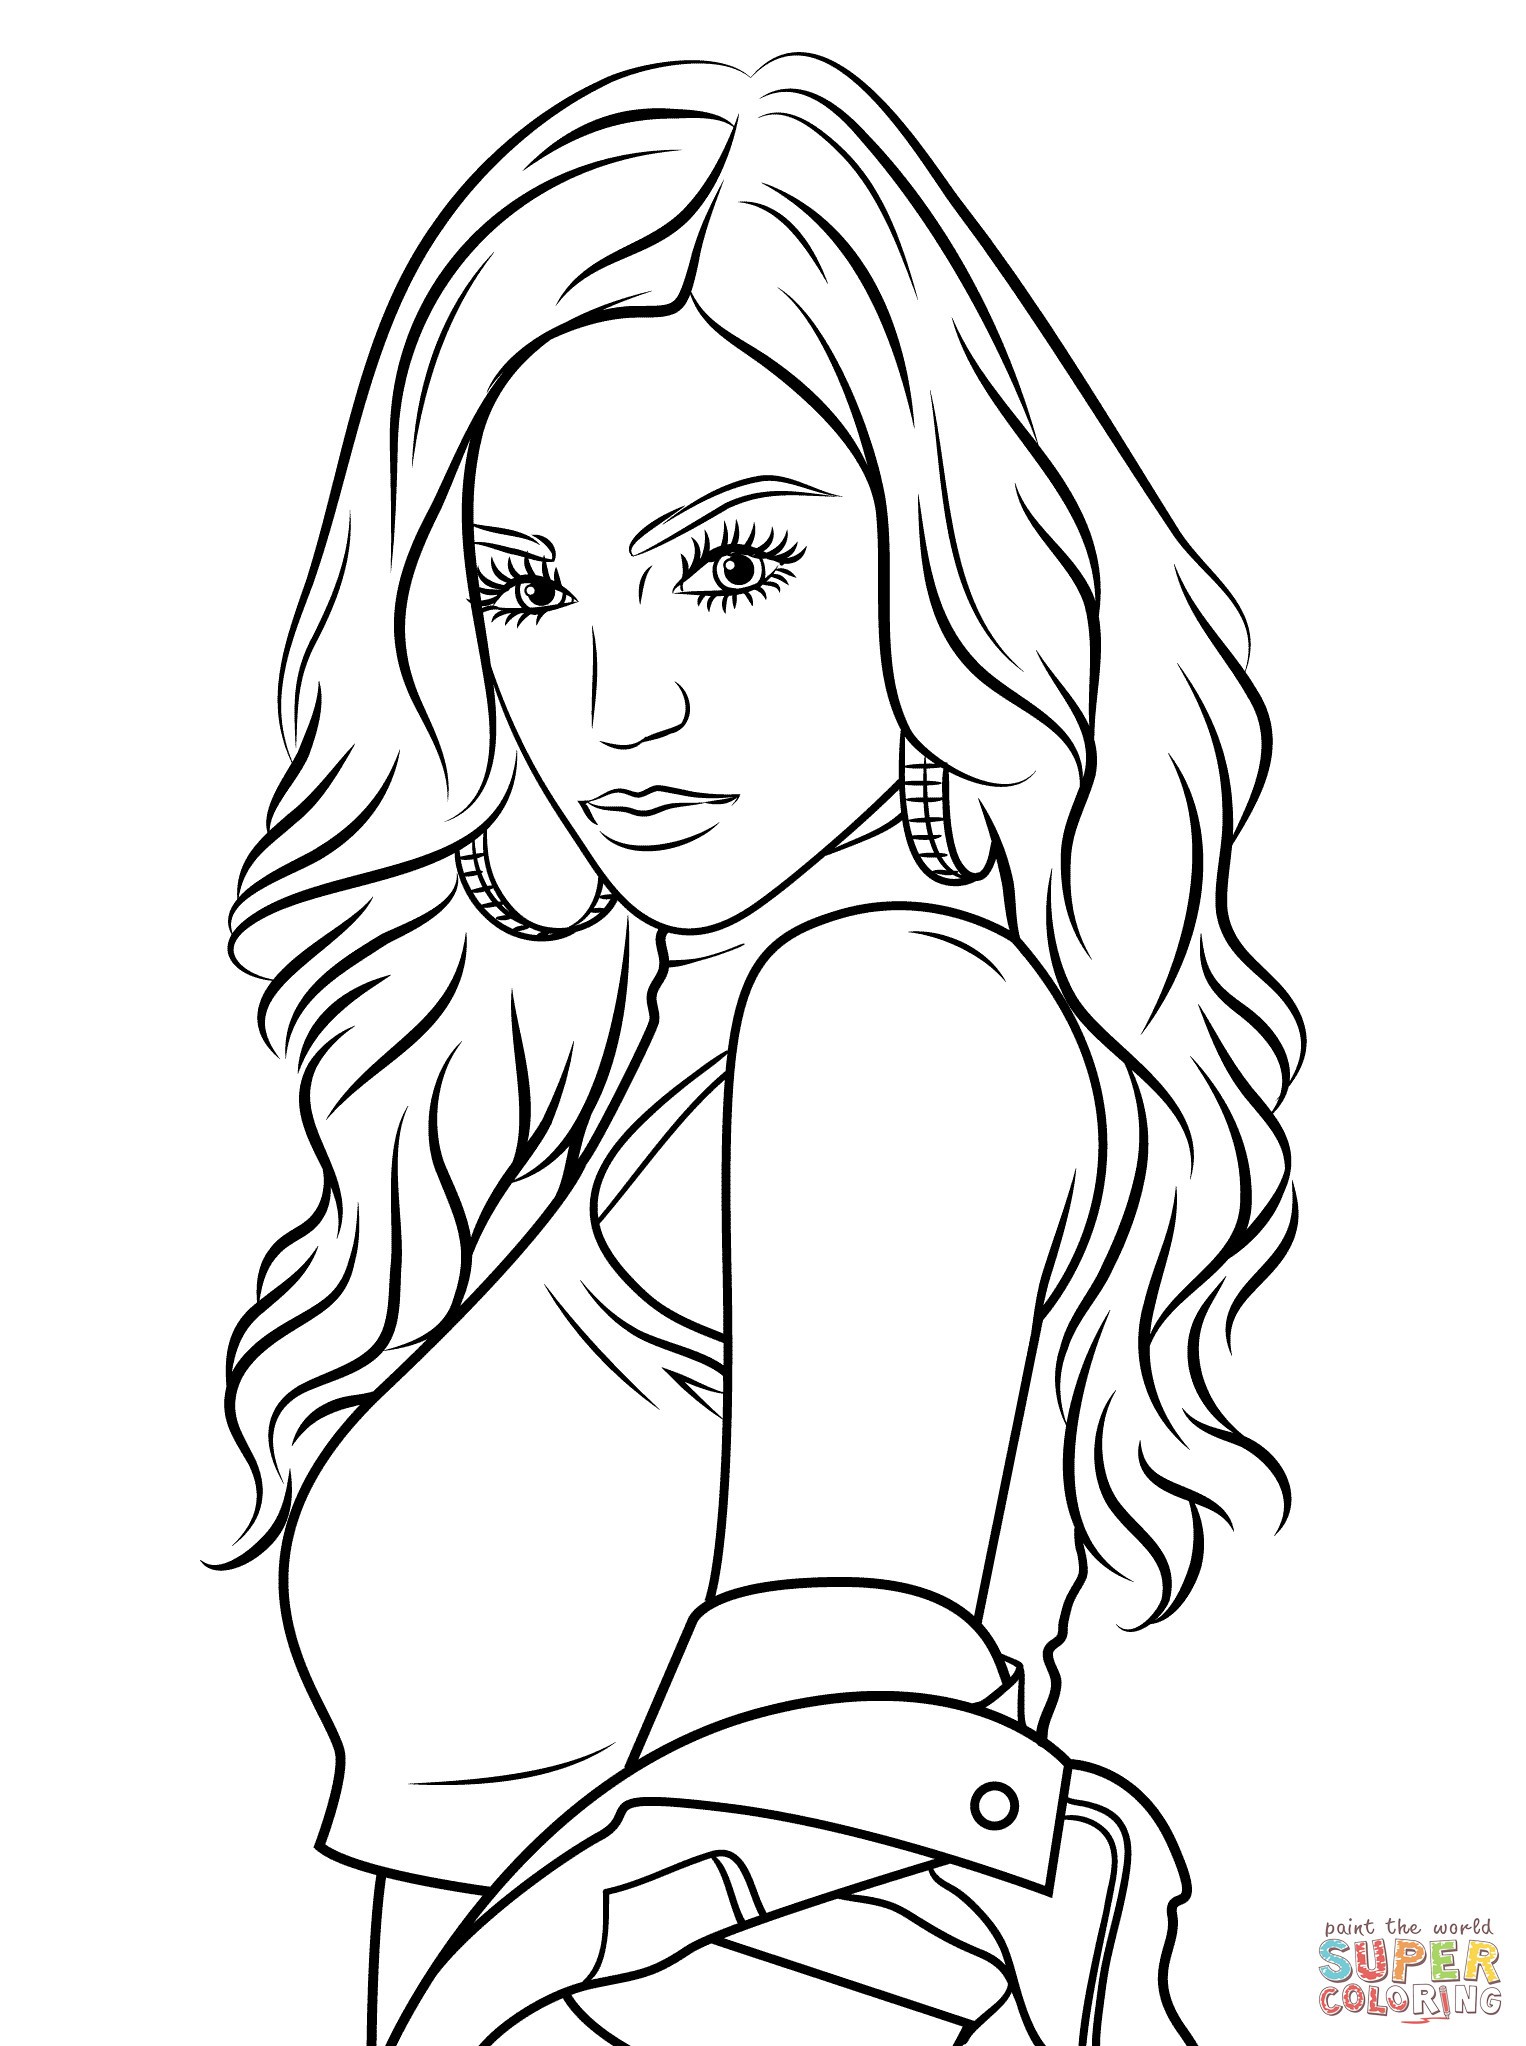 Coloring  Pretty Girl Coloring Pages Luxury The Best Ideas For ...